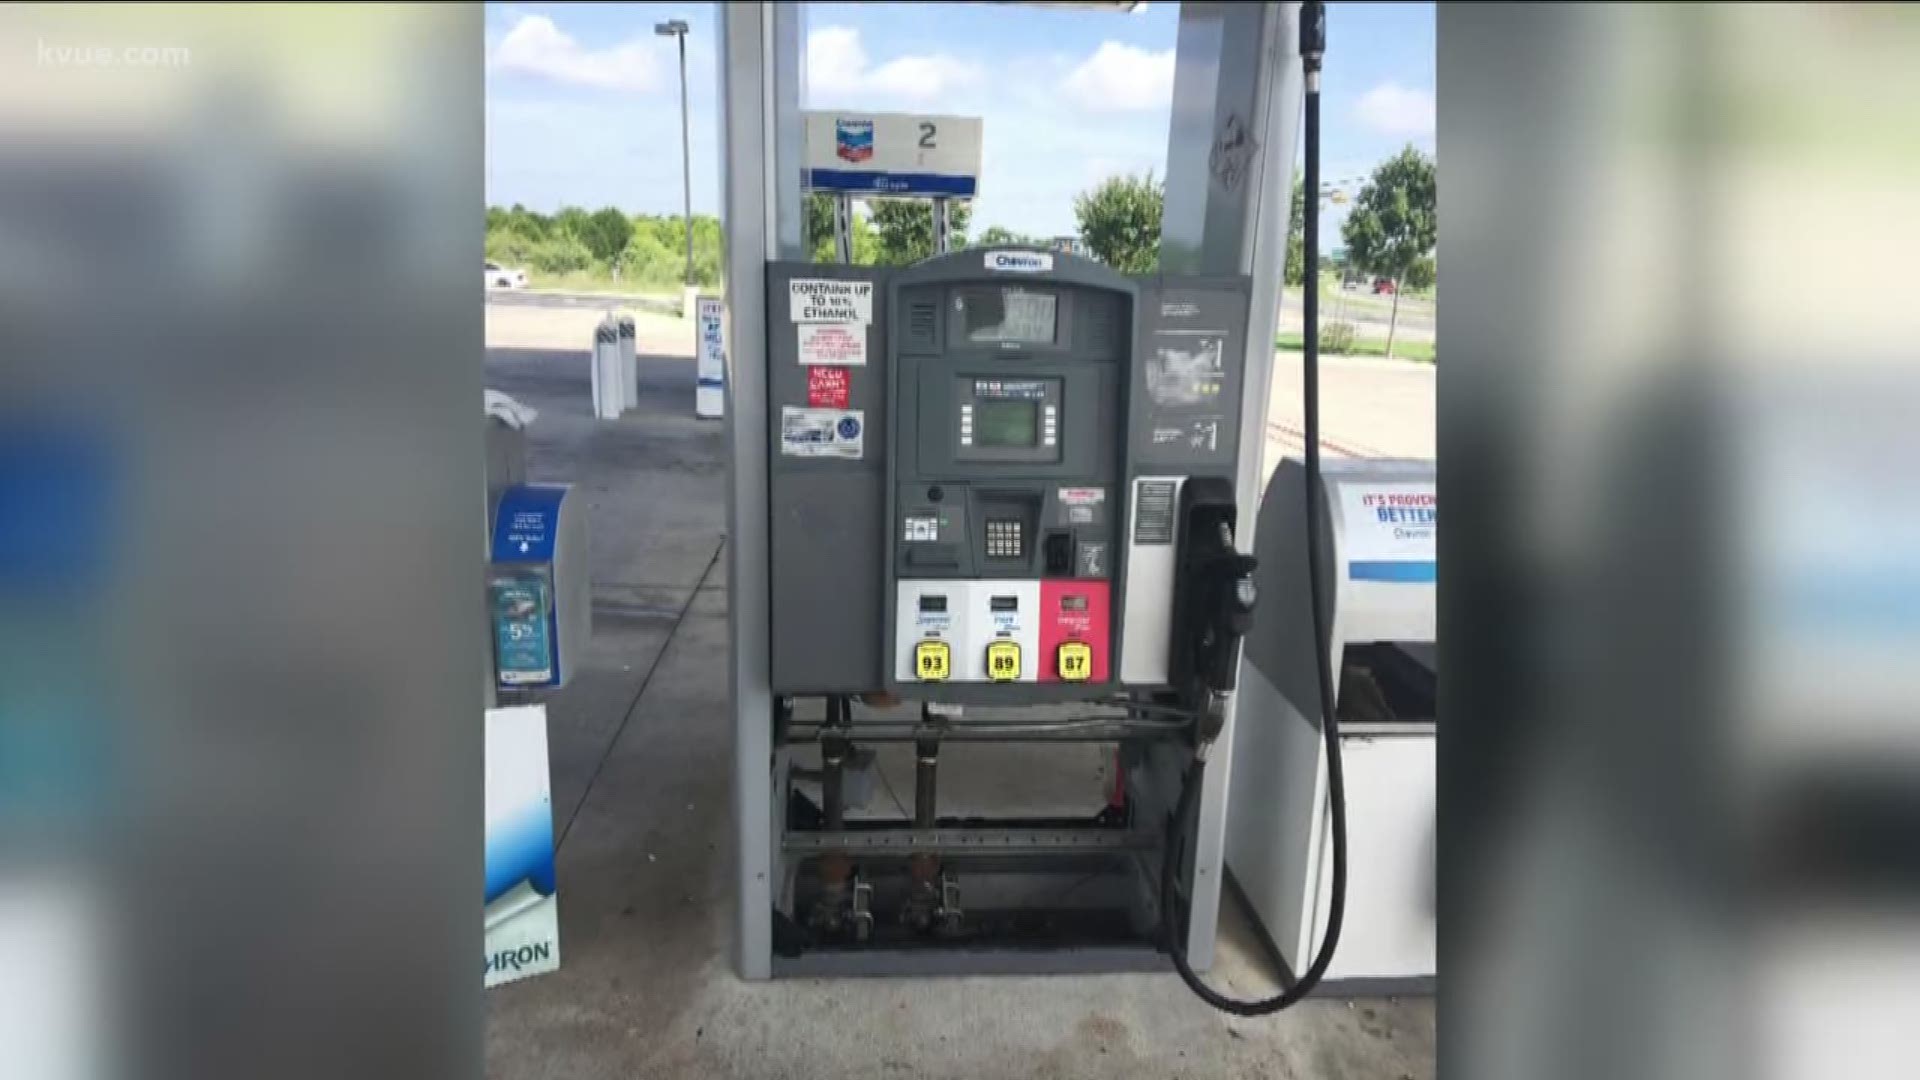 Another credit card skimmer was found at a gas station in North Austin.